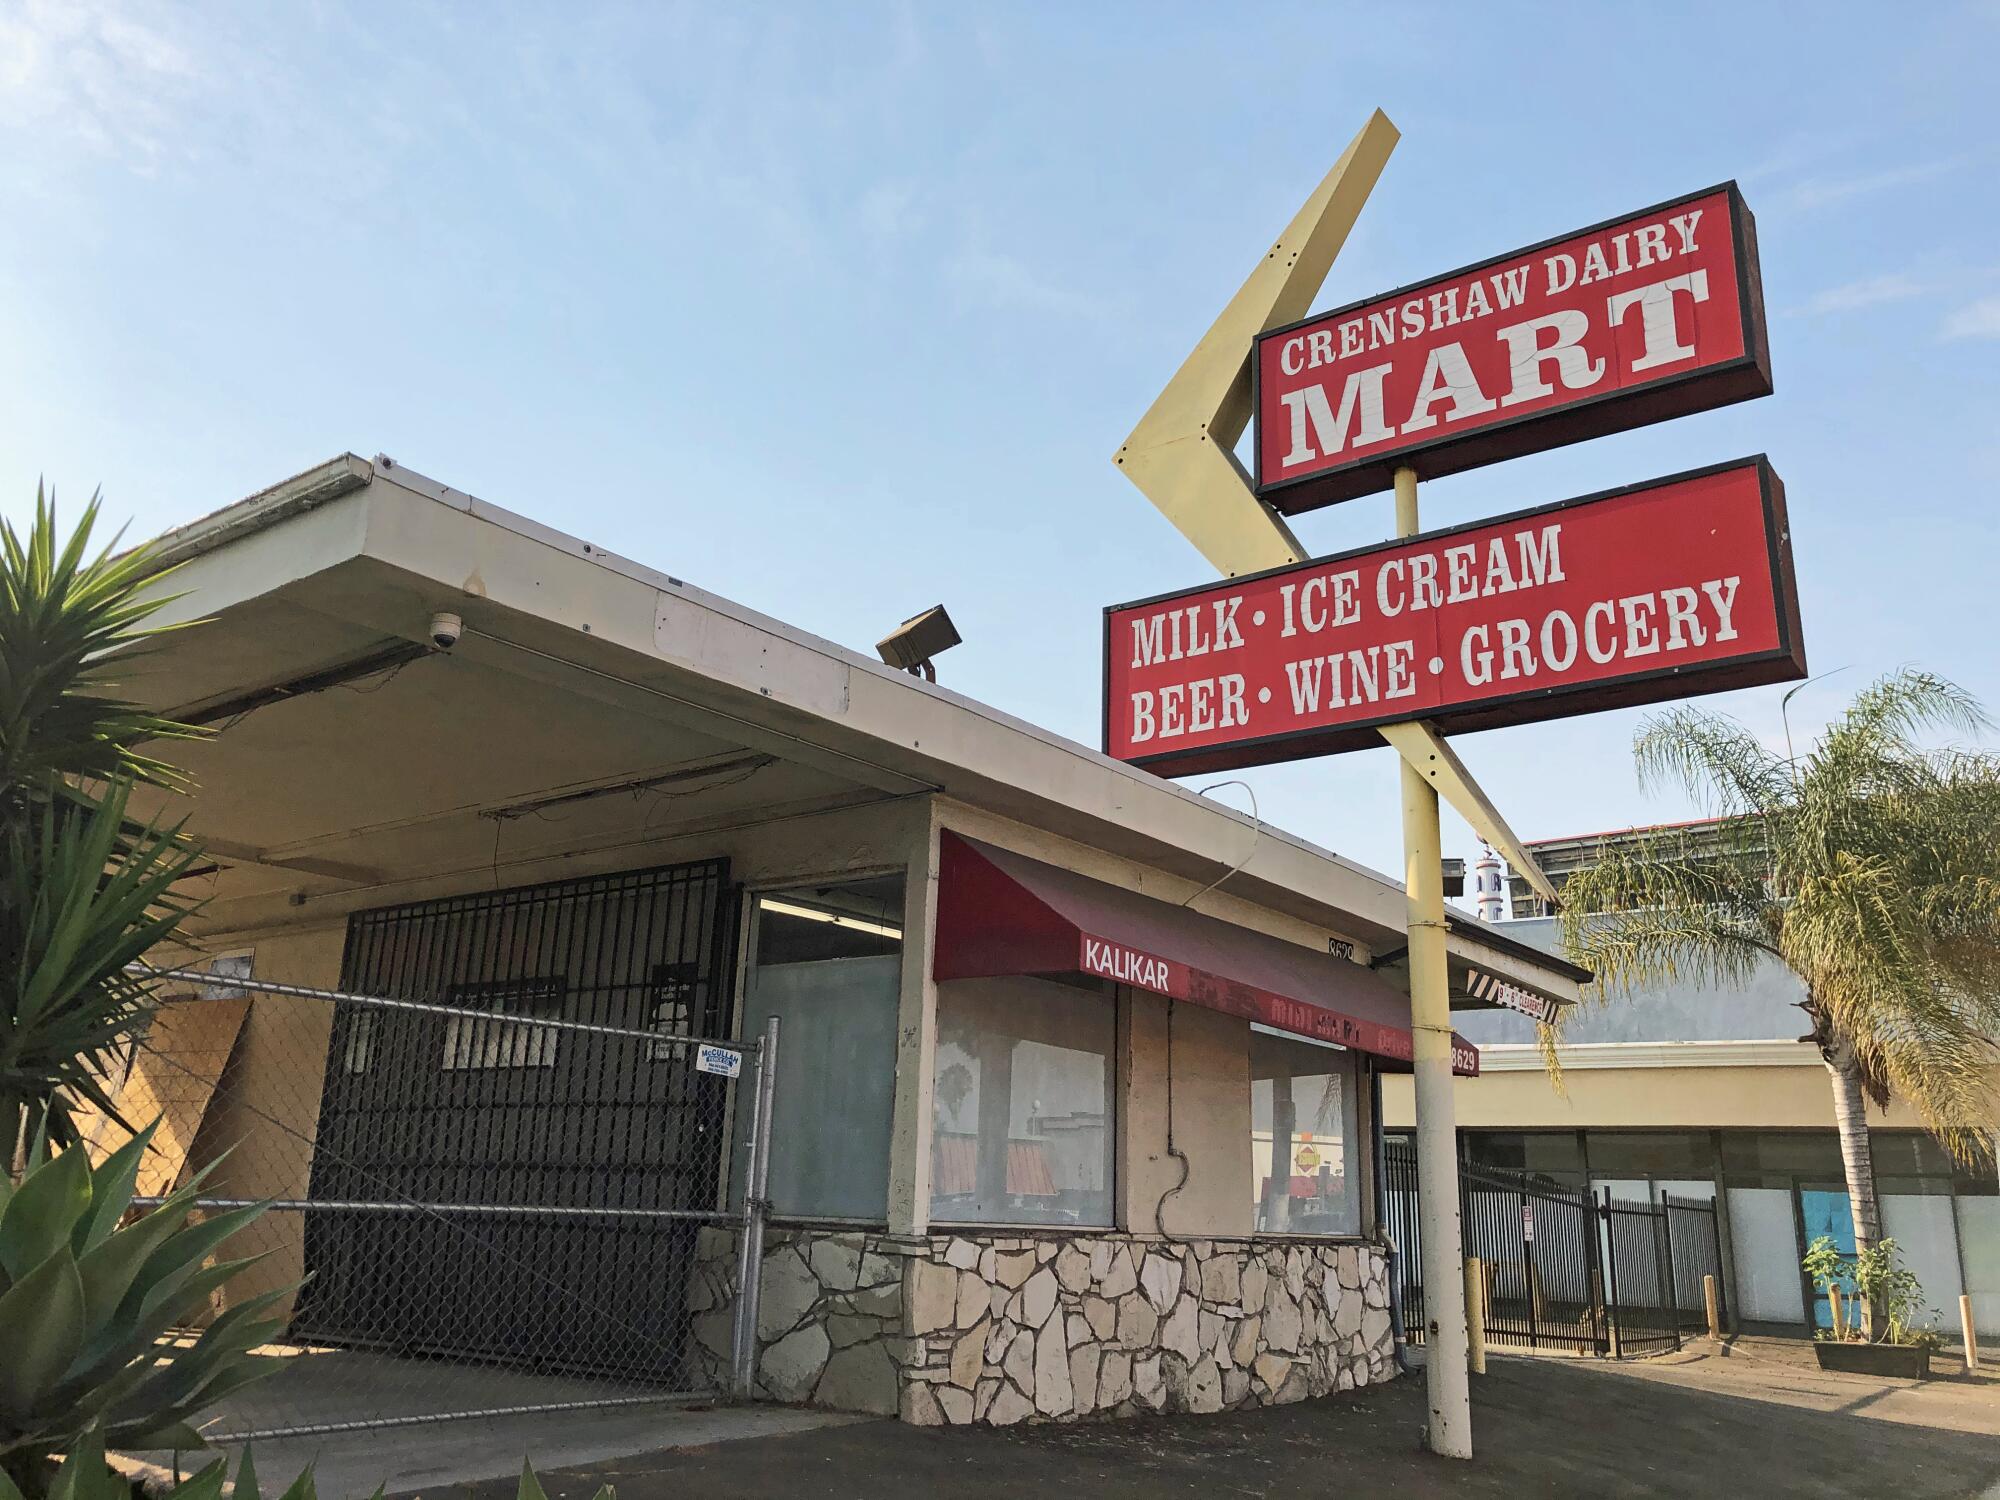 A 1960s-style mini mart has a red sign that reads "Crenshaw Dairy Mart" 